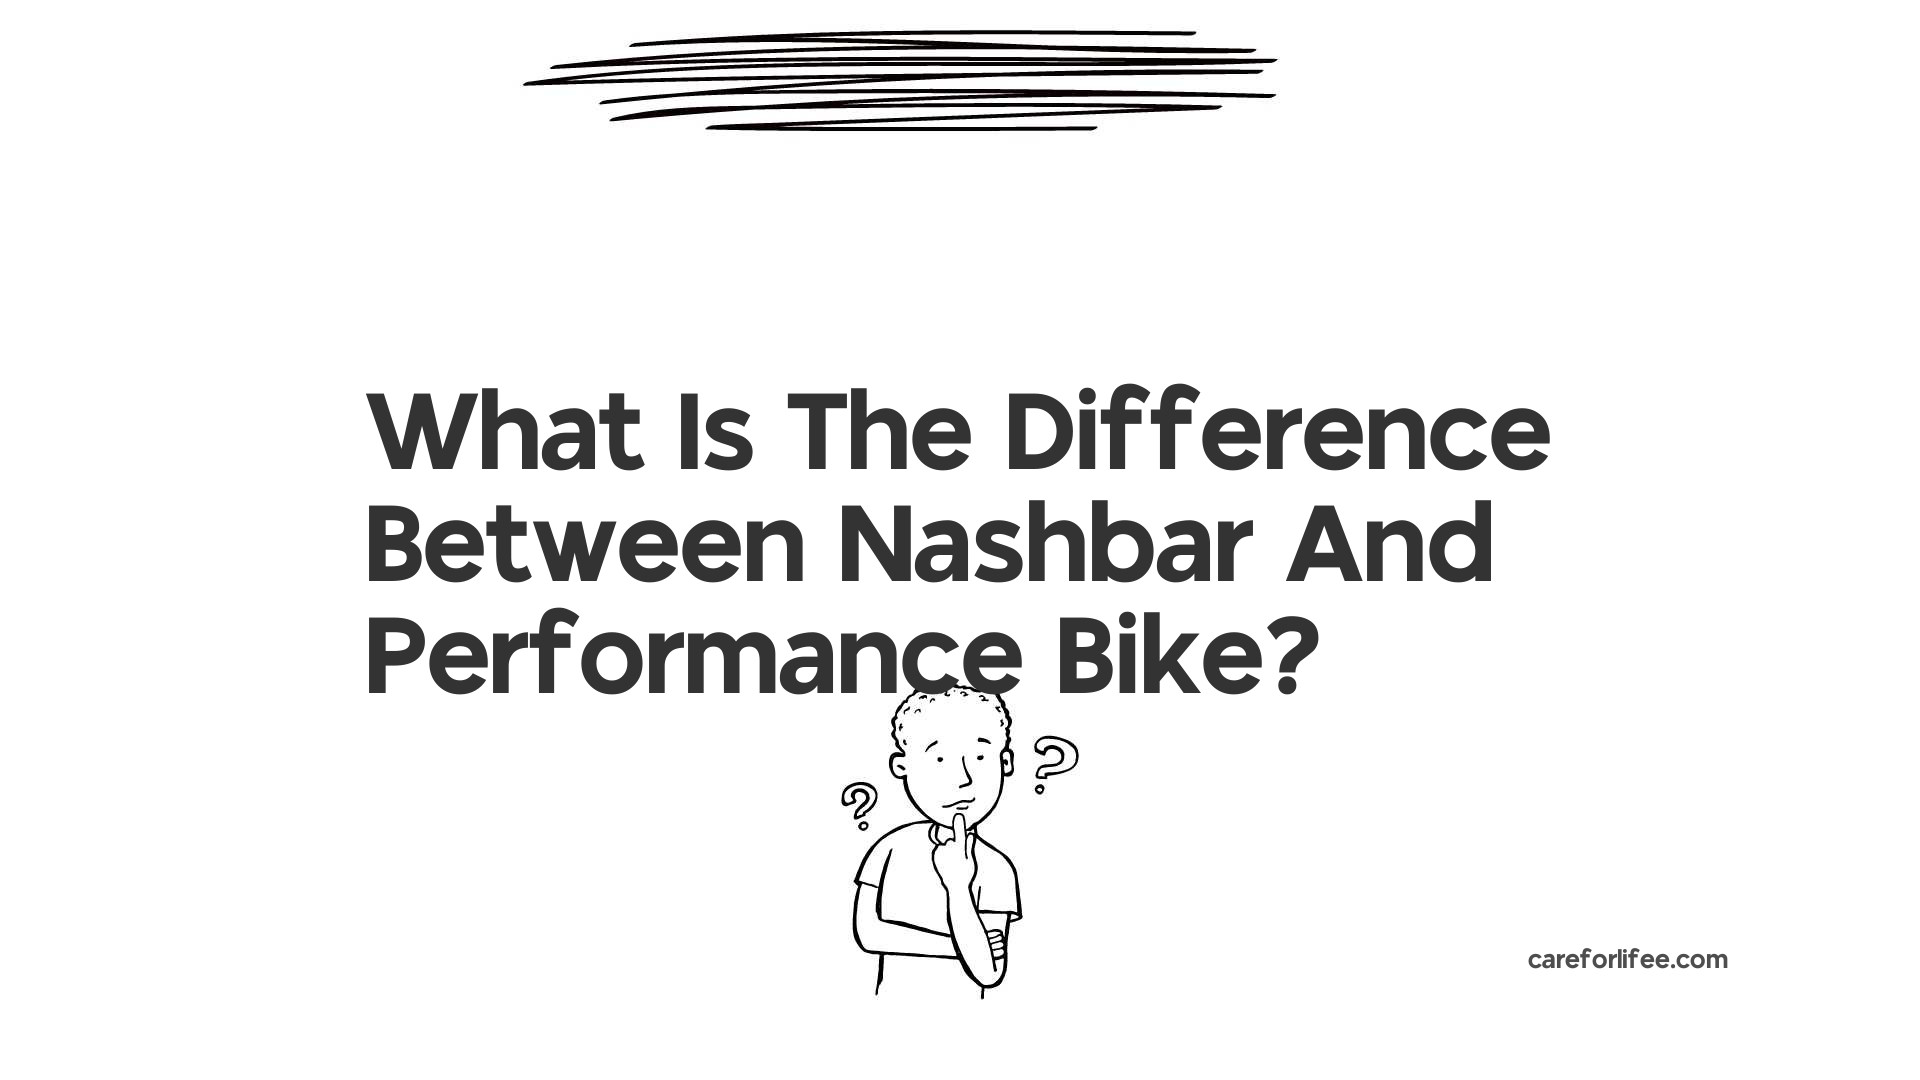 What Is The Difference Between Nashbar And Performance Bike?